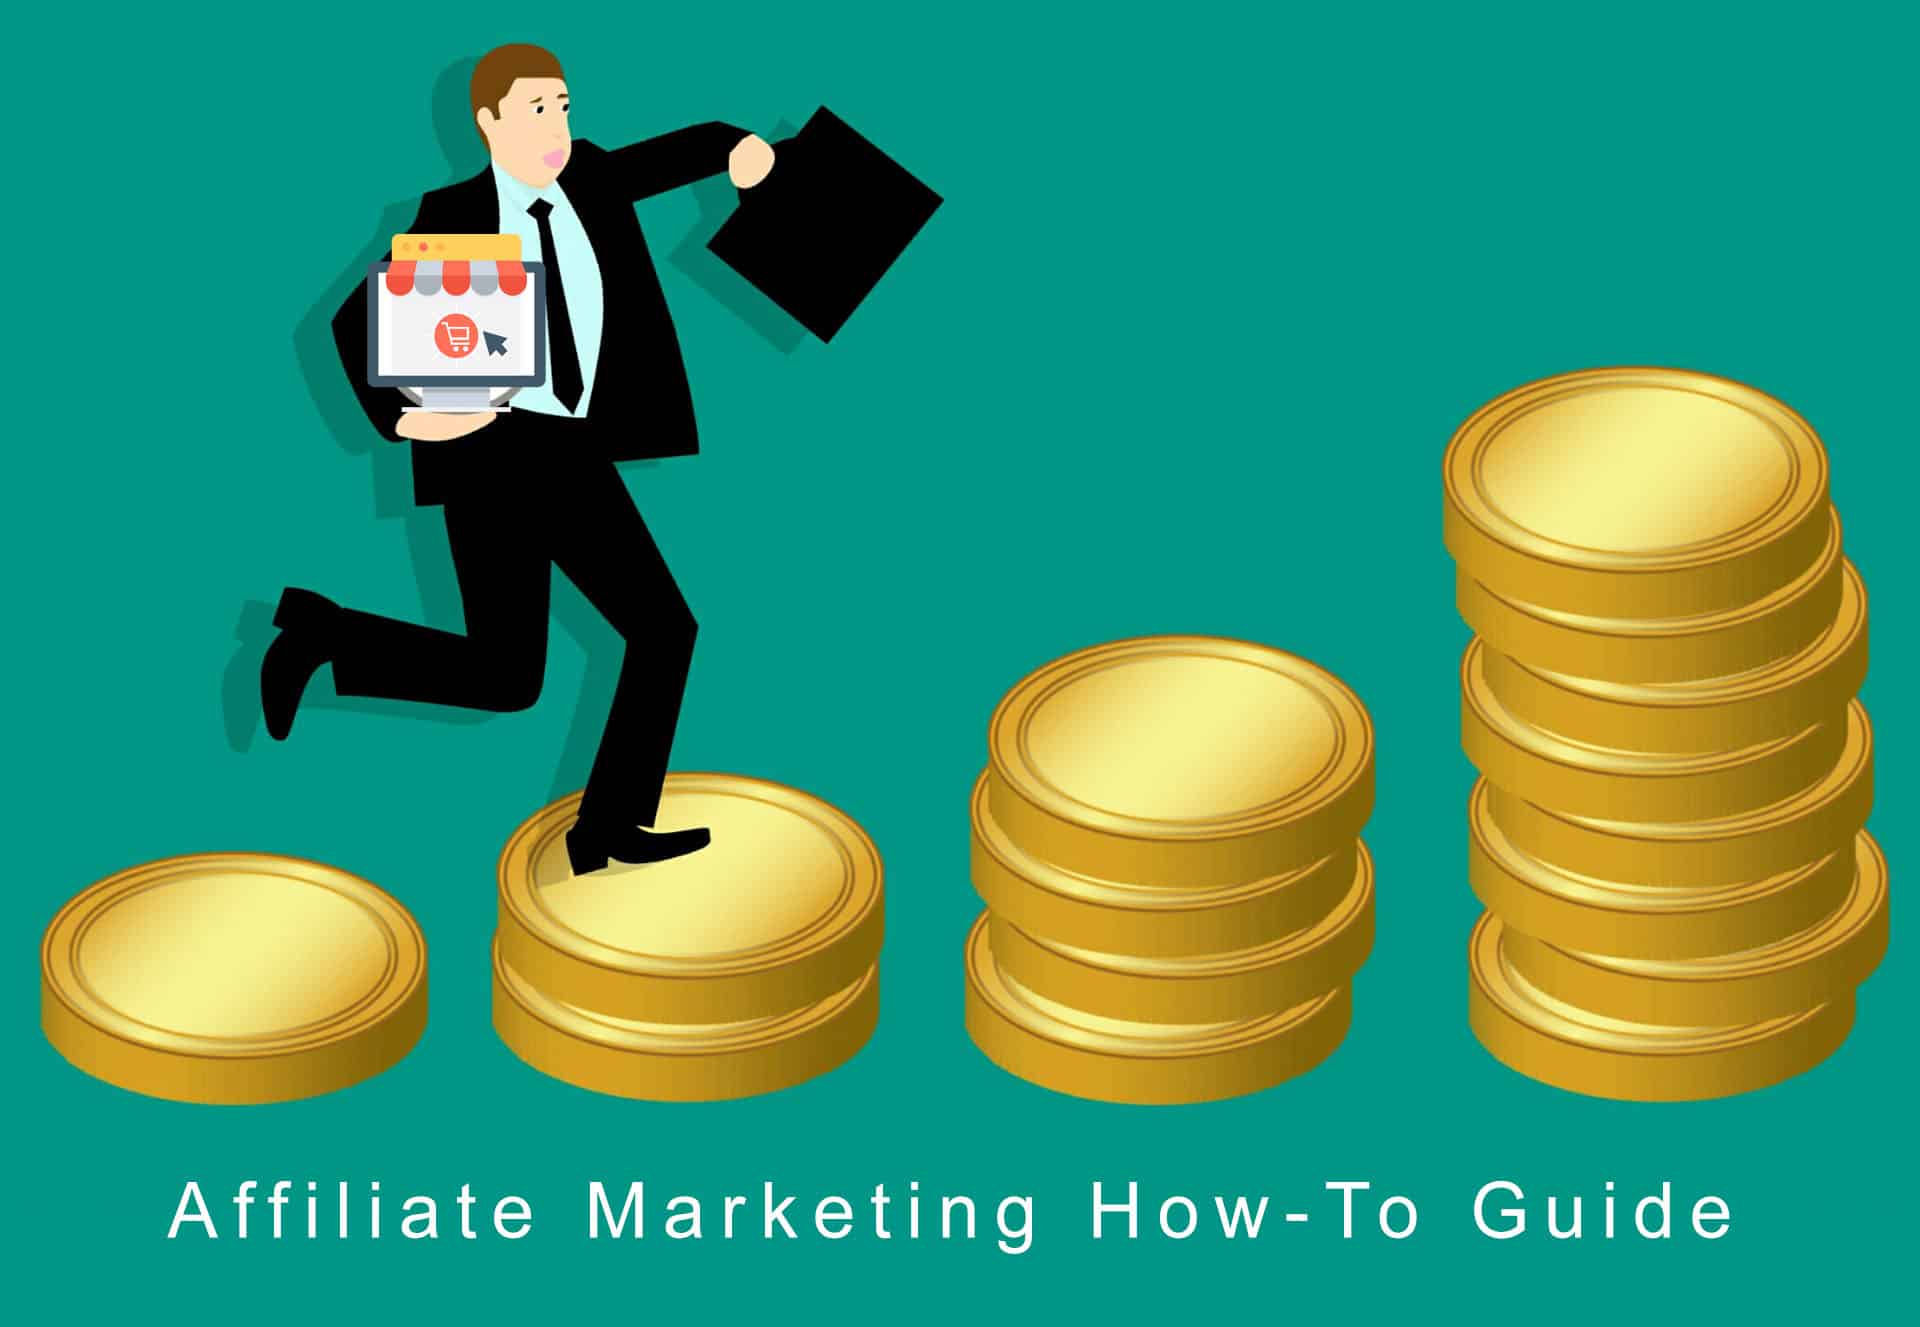 How to become an affiliate